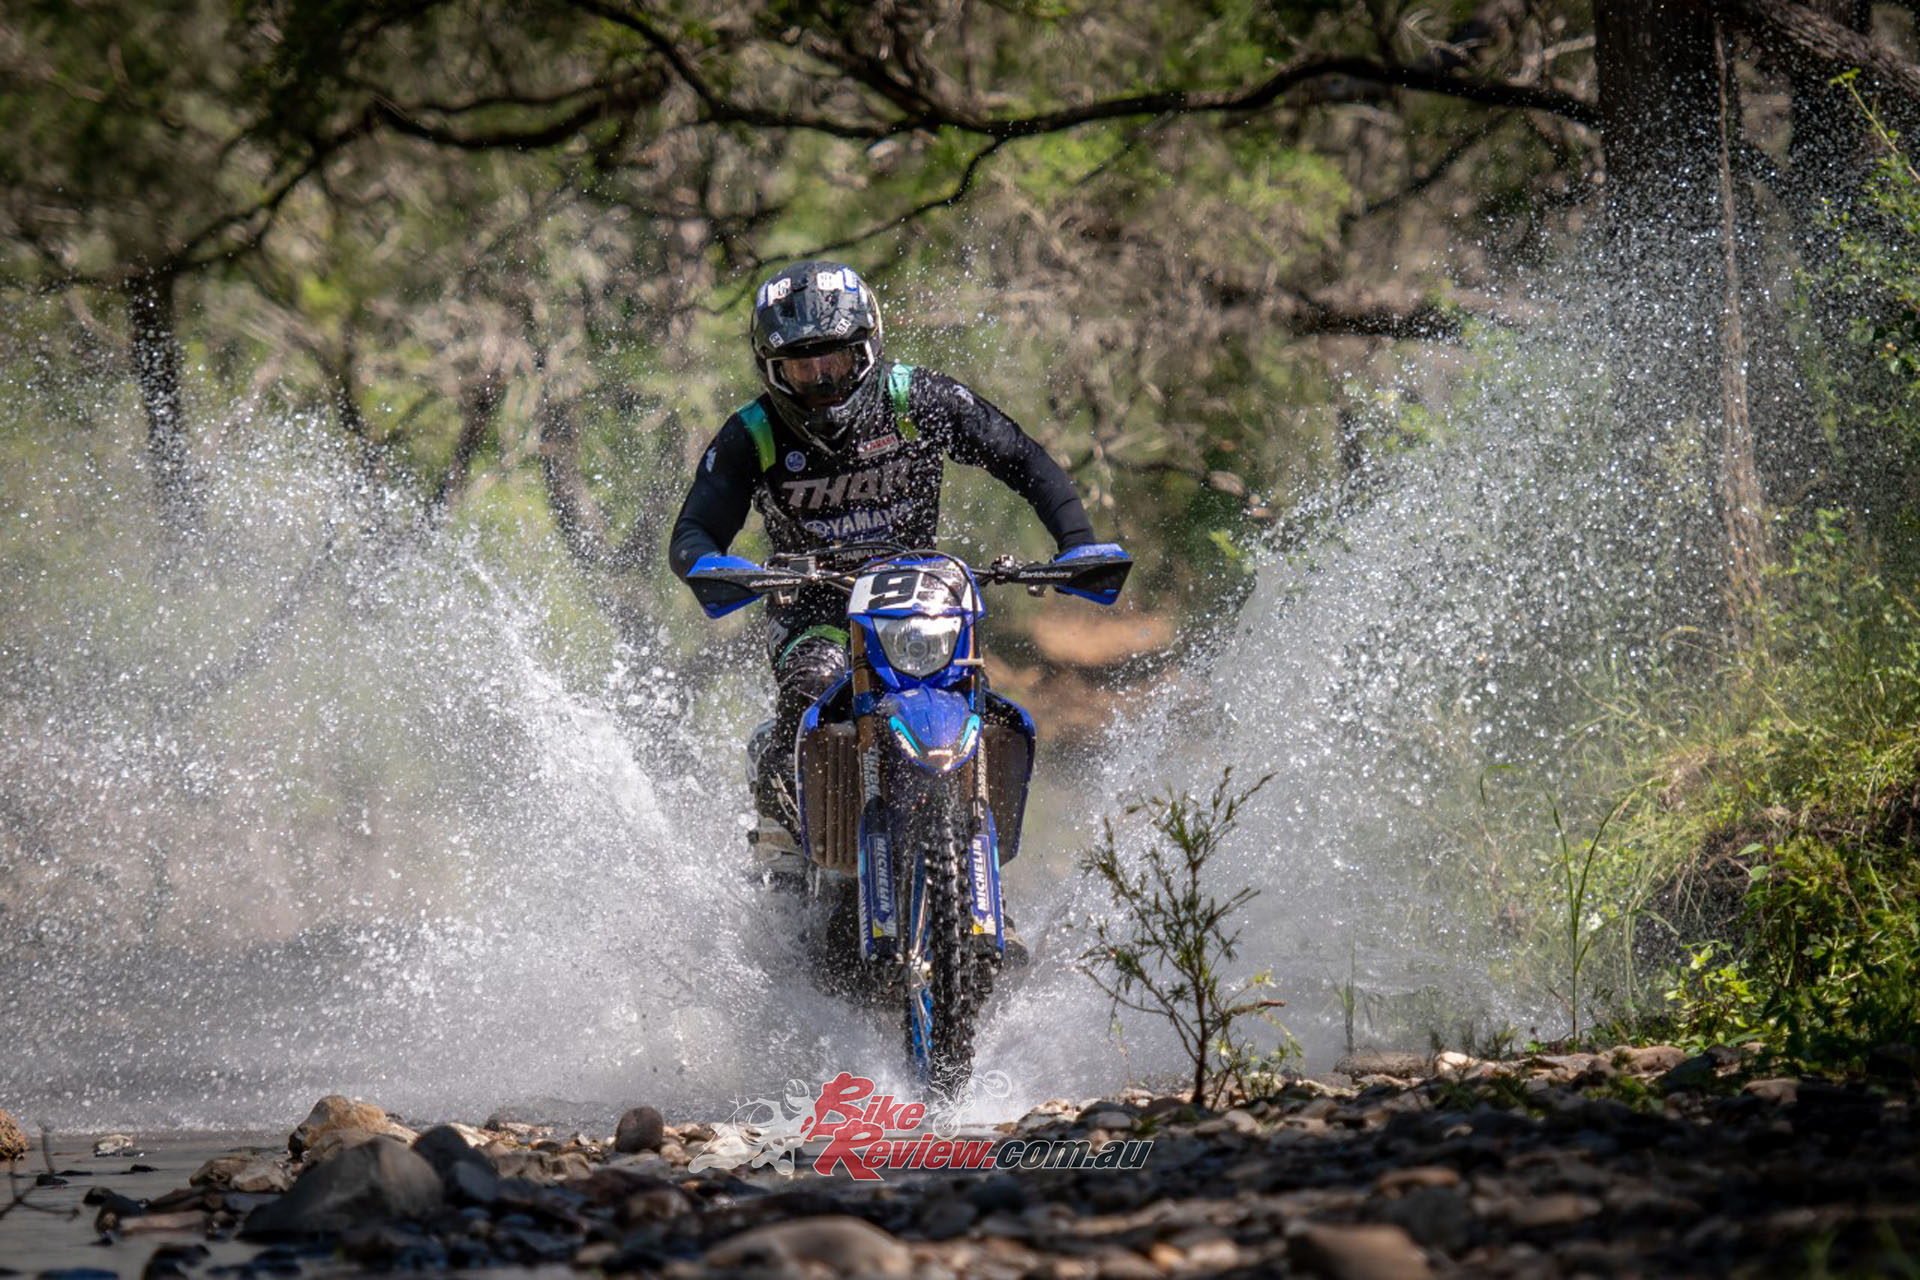 Green and Driscoll will spearhead the charge in the E2 (450cc) category for 2022. Green, the veteran of over 10 years of professional off-road racing, shows no signs of slowing down and his passion for racing is as strong as ever. 